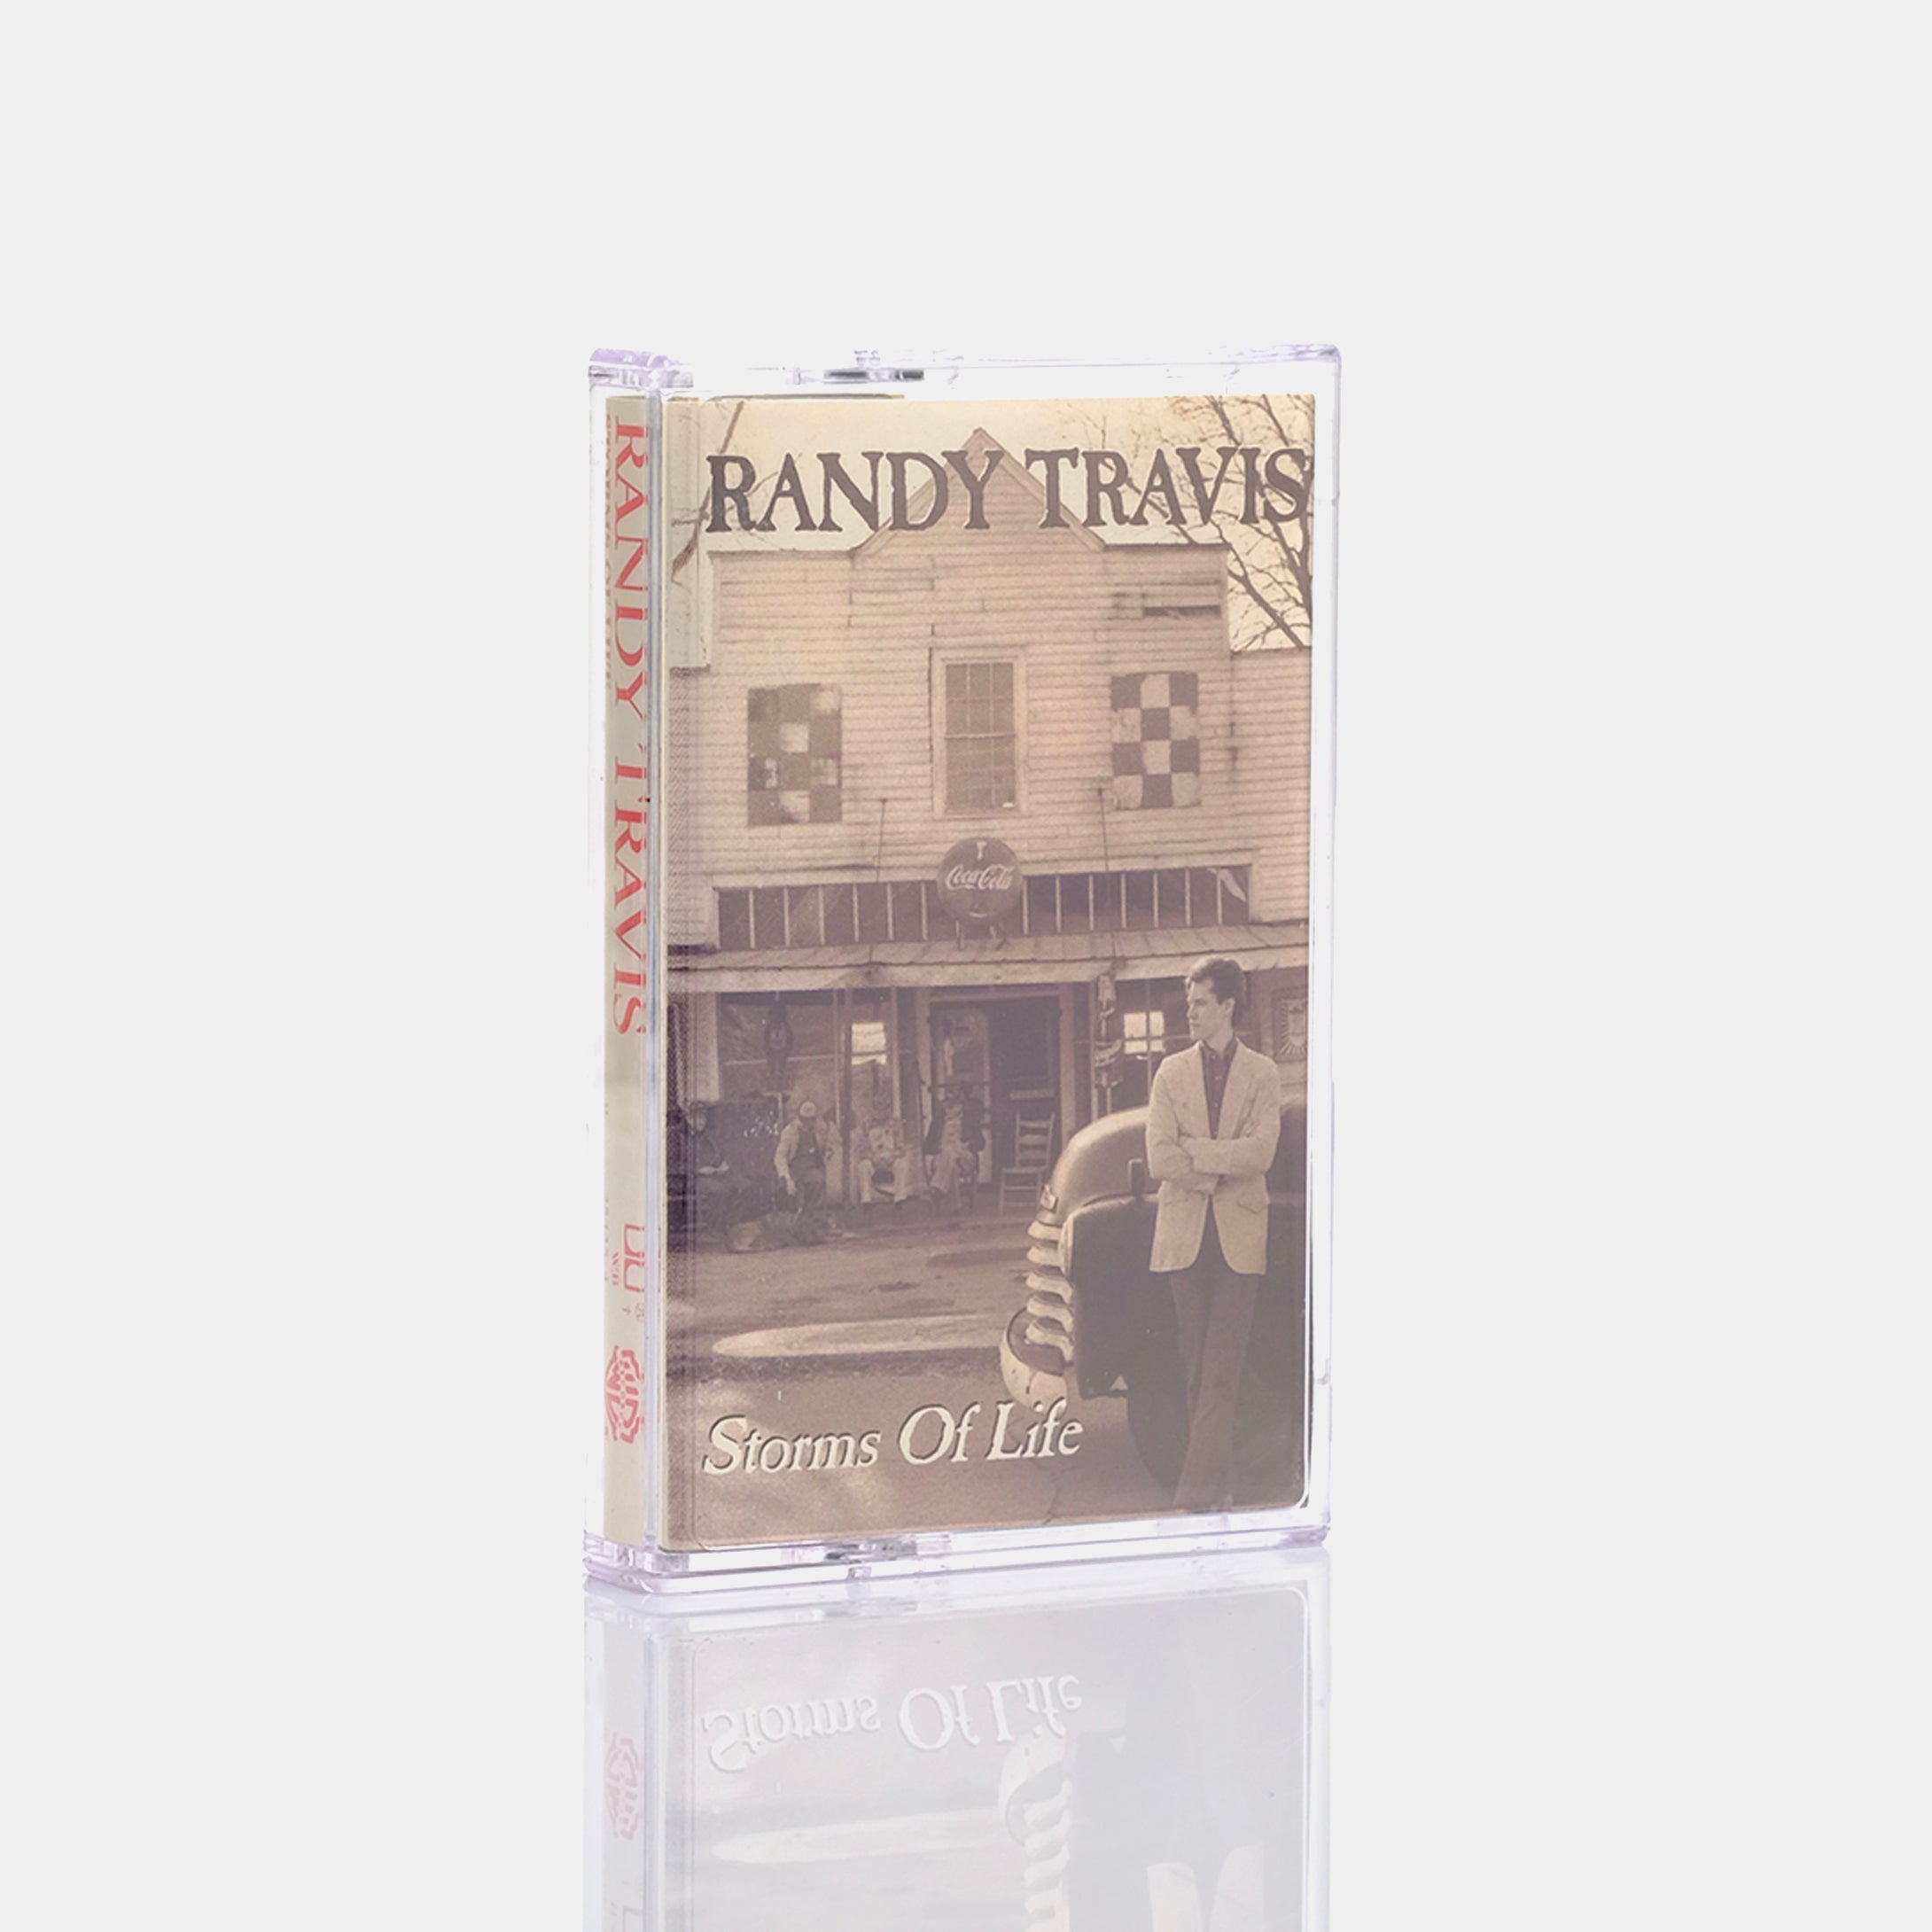 Randy Travis - Storms of Life Cassette Tape